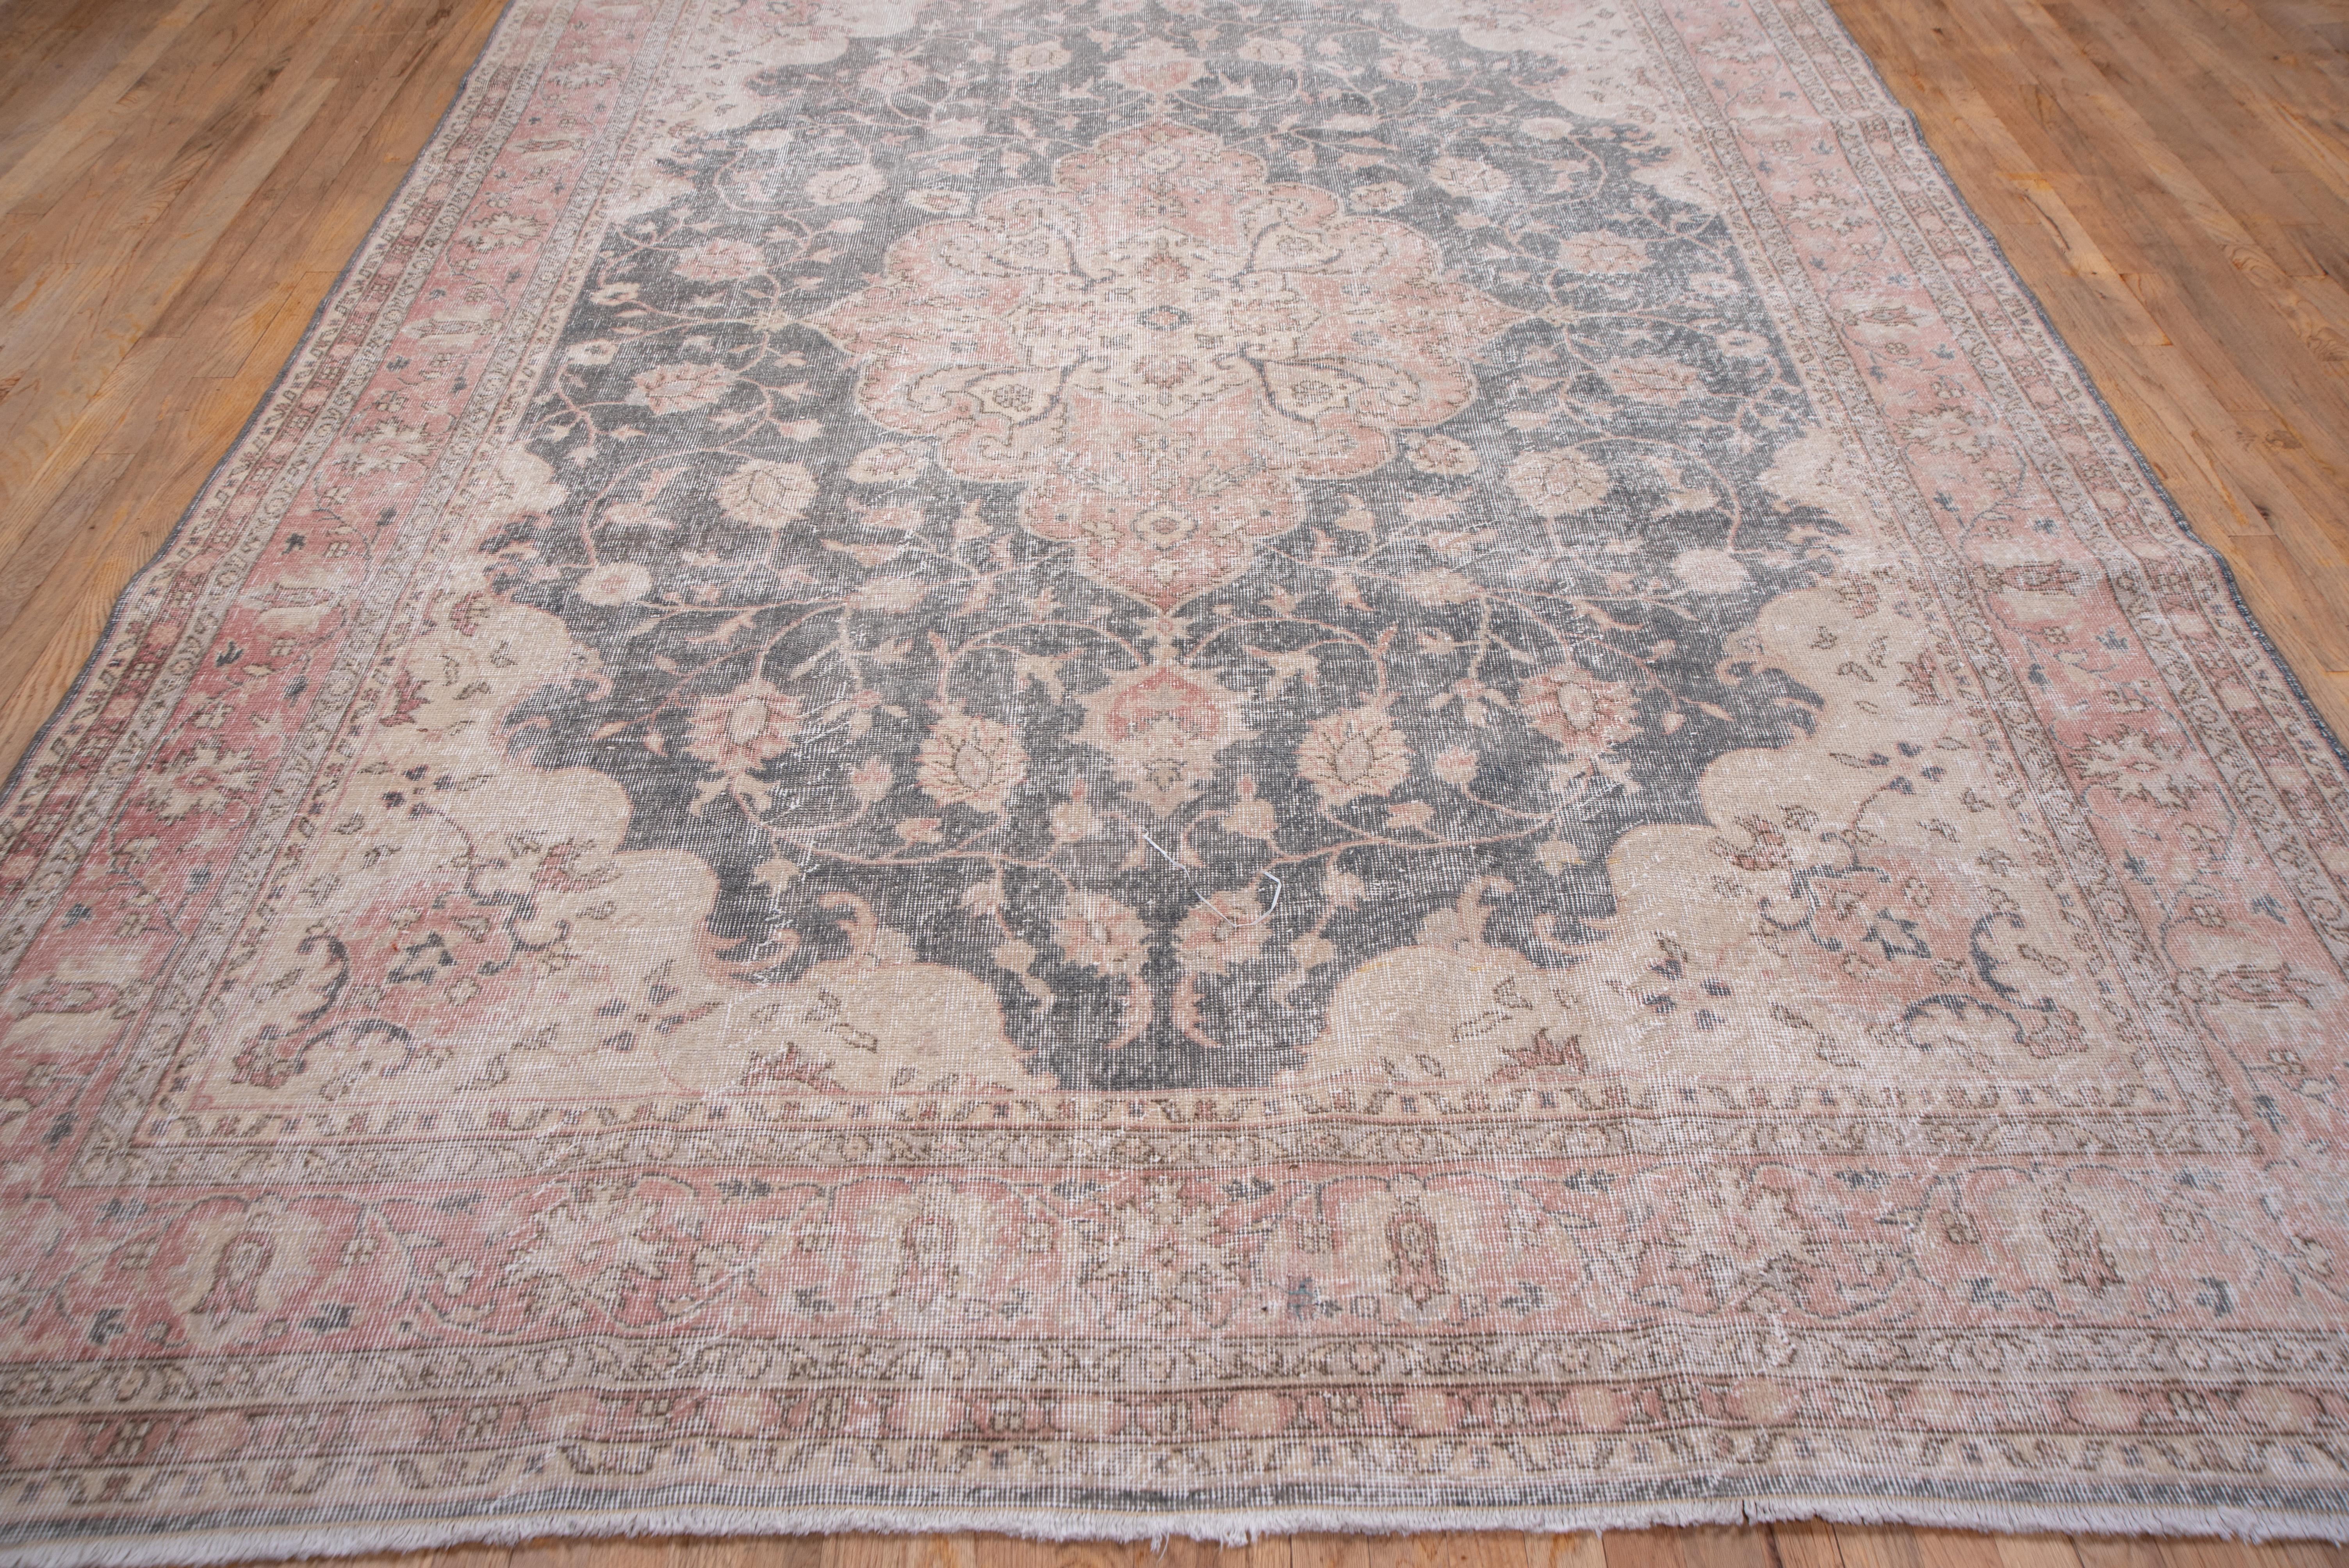 Hand-Knotted Lightly Distressed Oushak Carpet, Shabby Chic Style, Gray Field, Pink Border